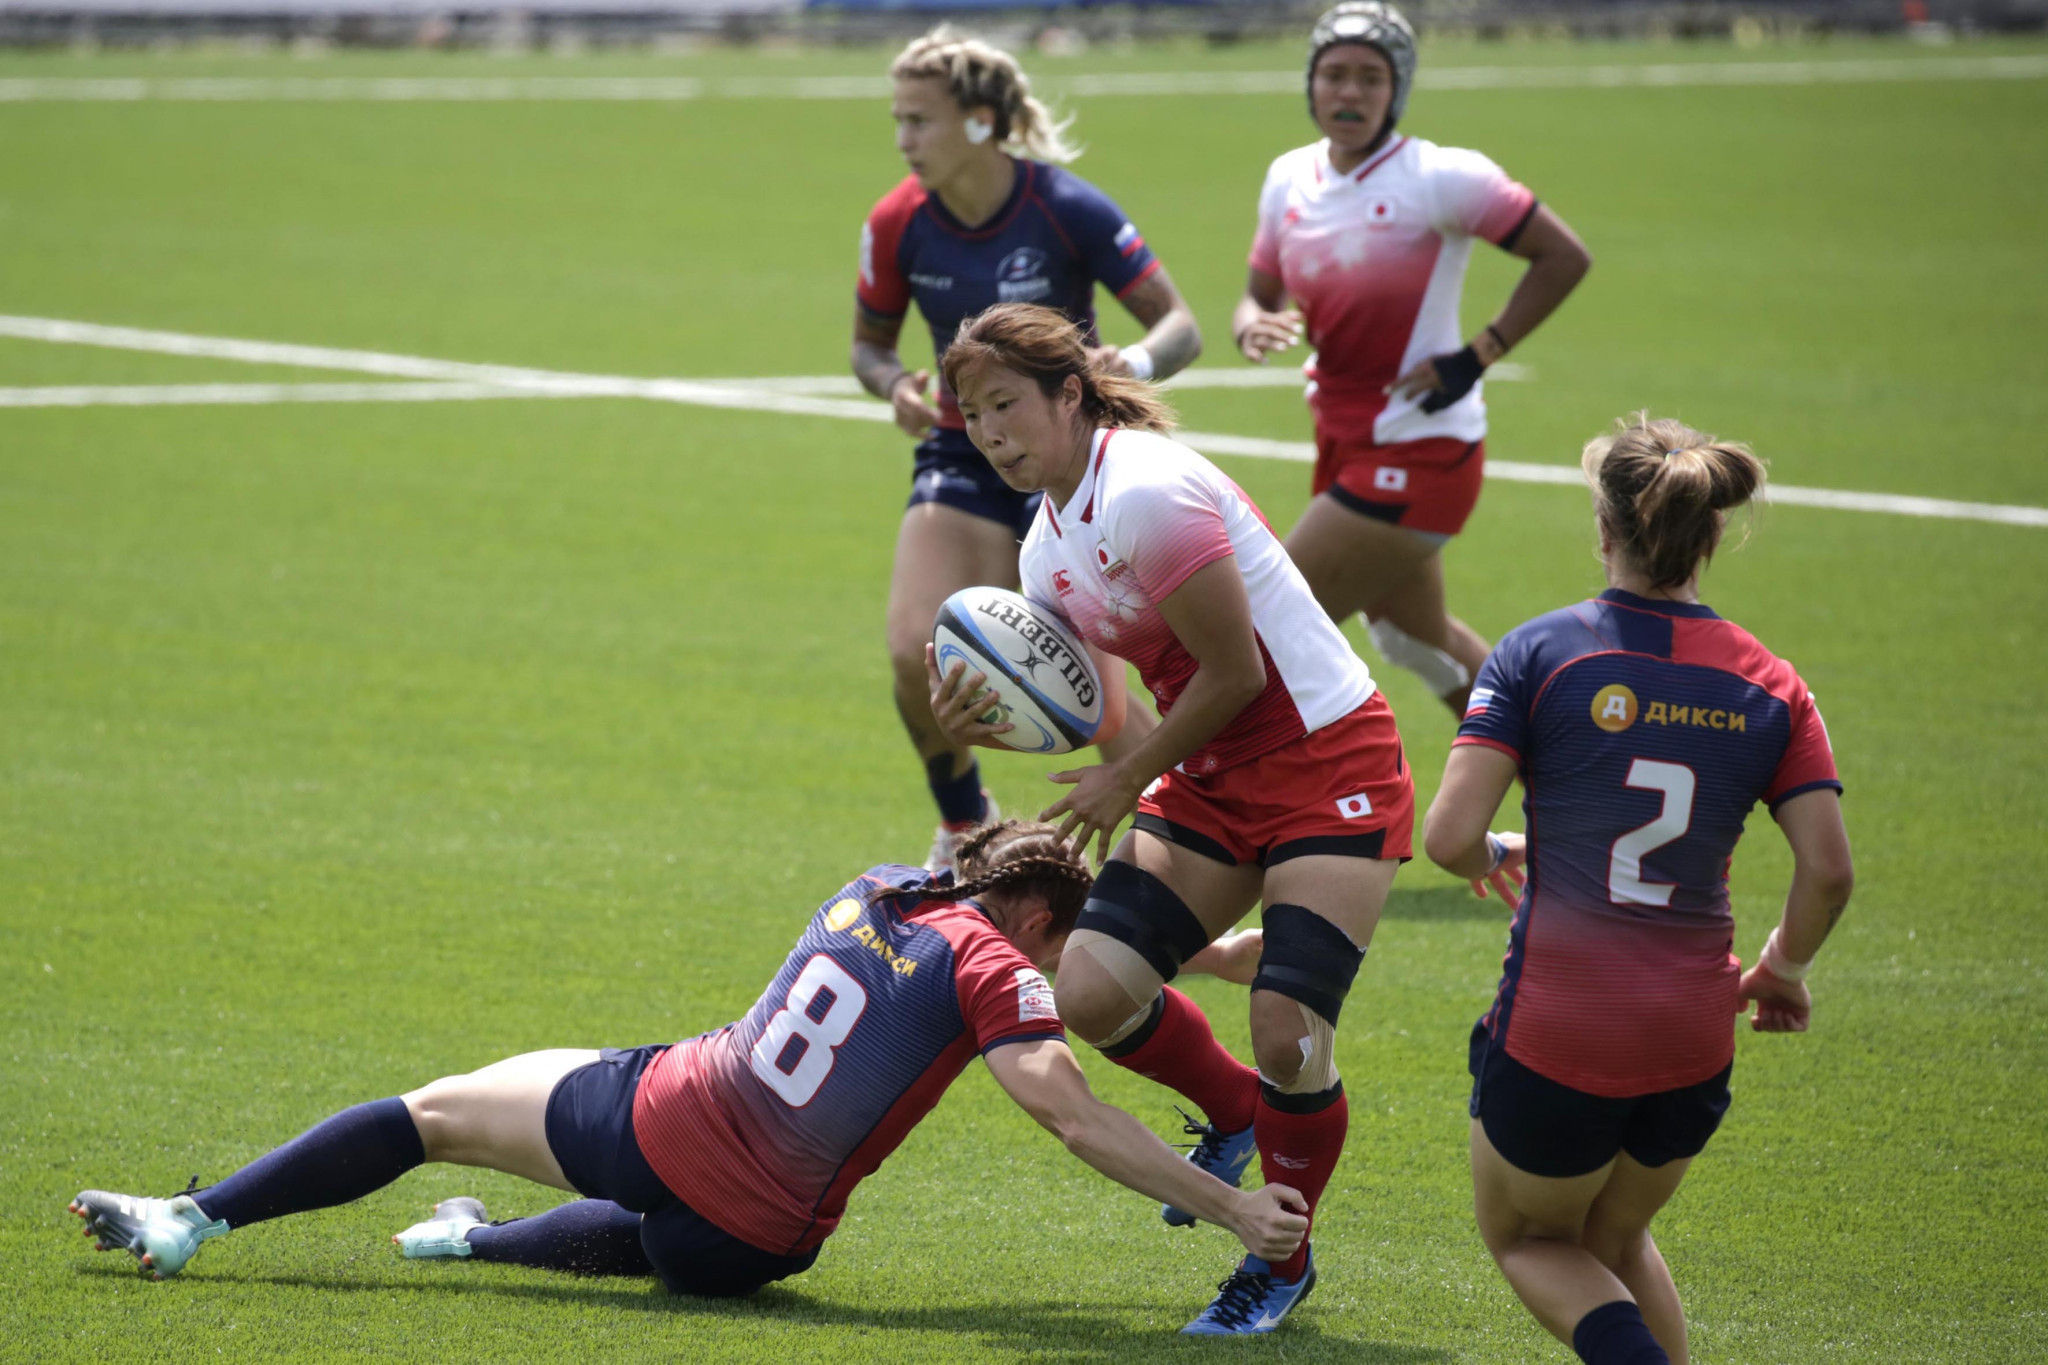 Japan won gold in the men's and women's rugby sevens tournaments ©Naples 2019